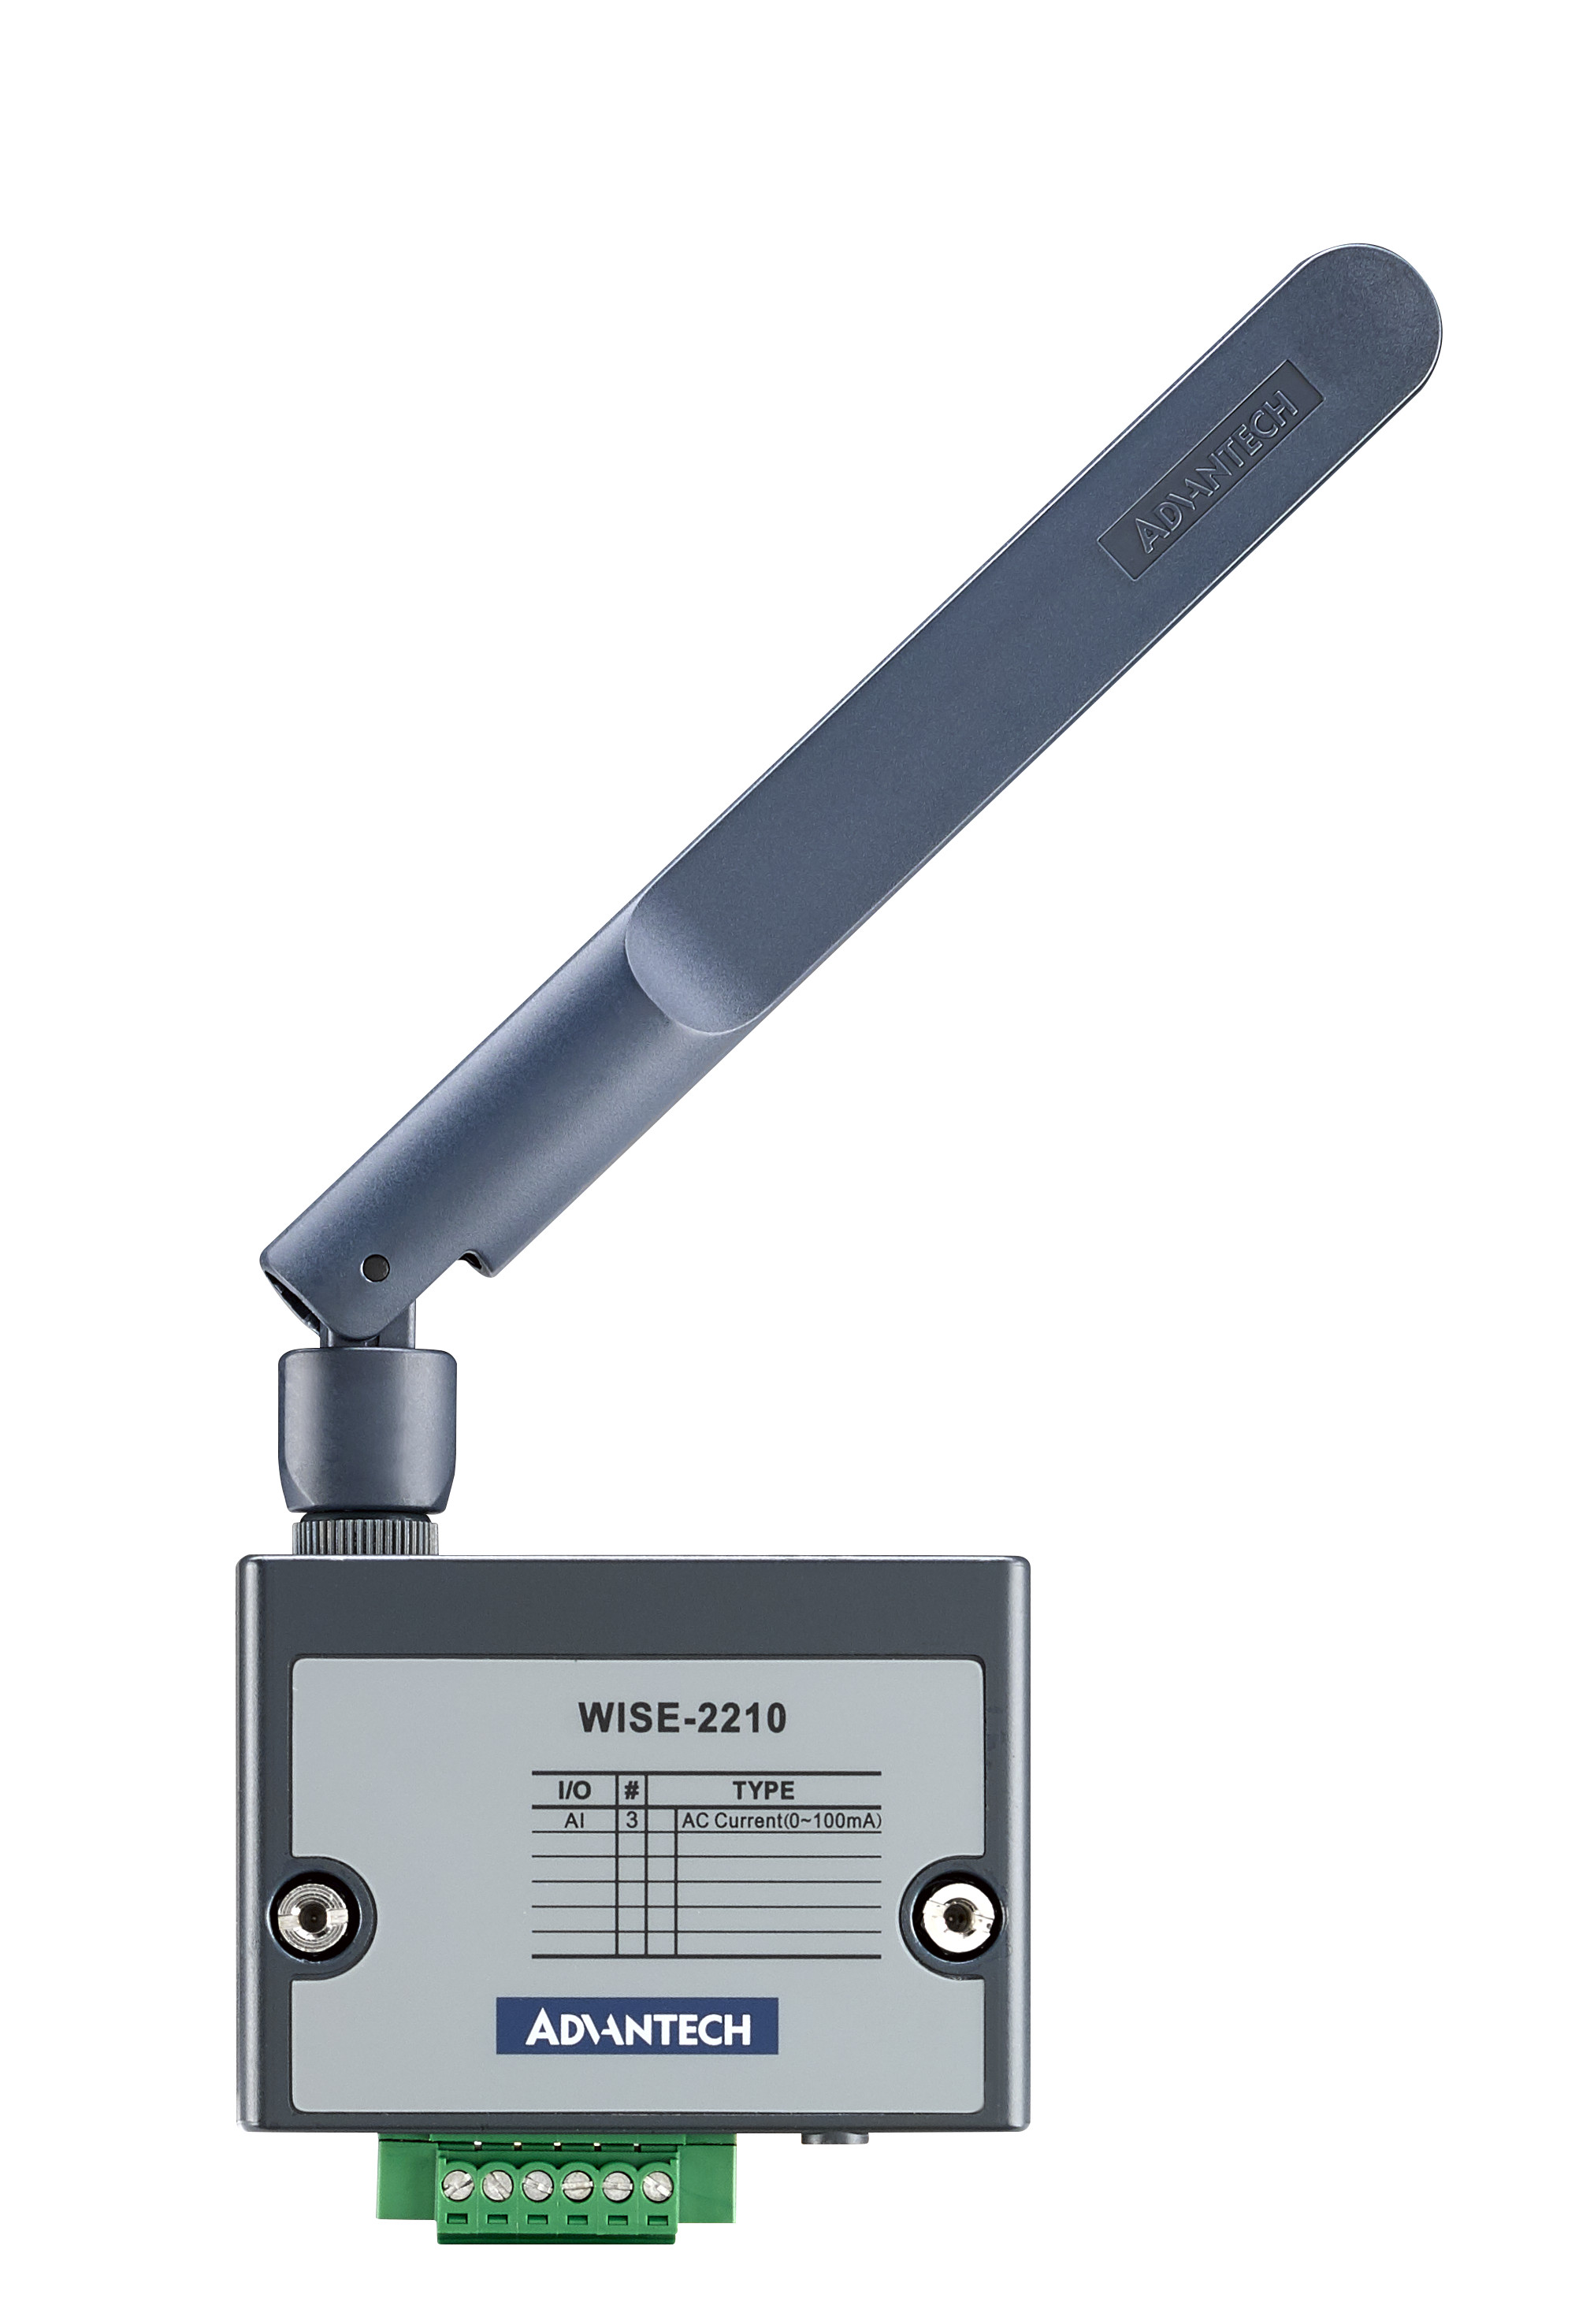 WISE-2210 with antenna